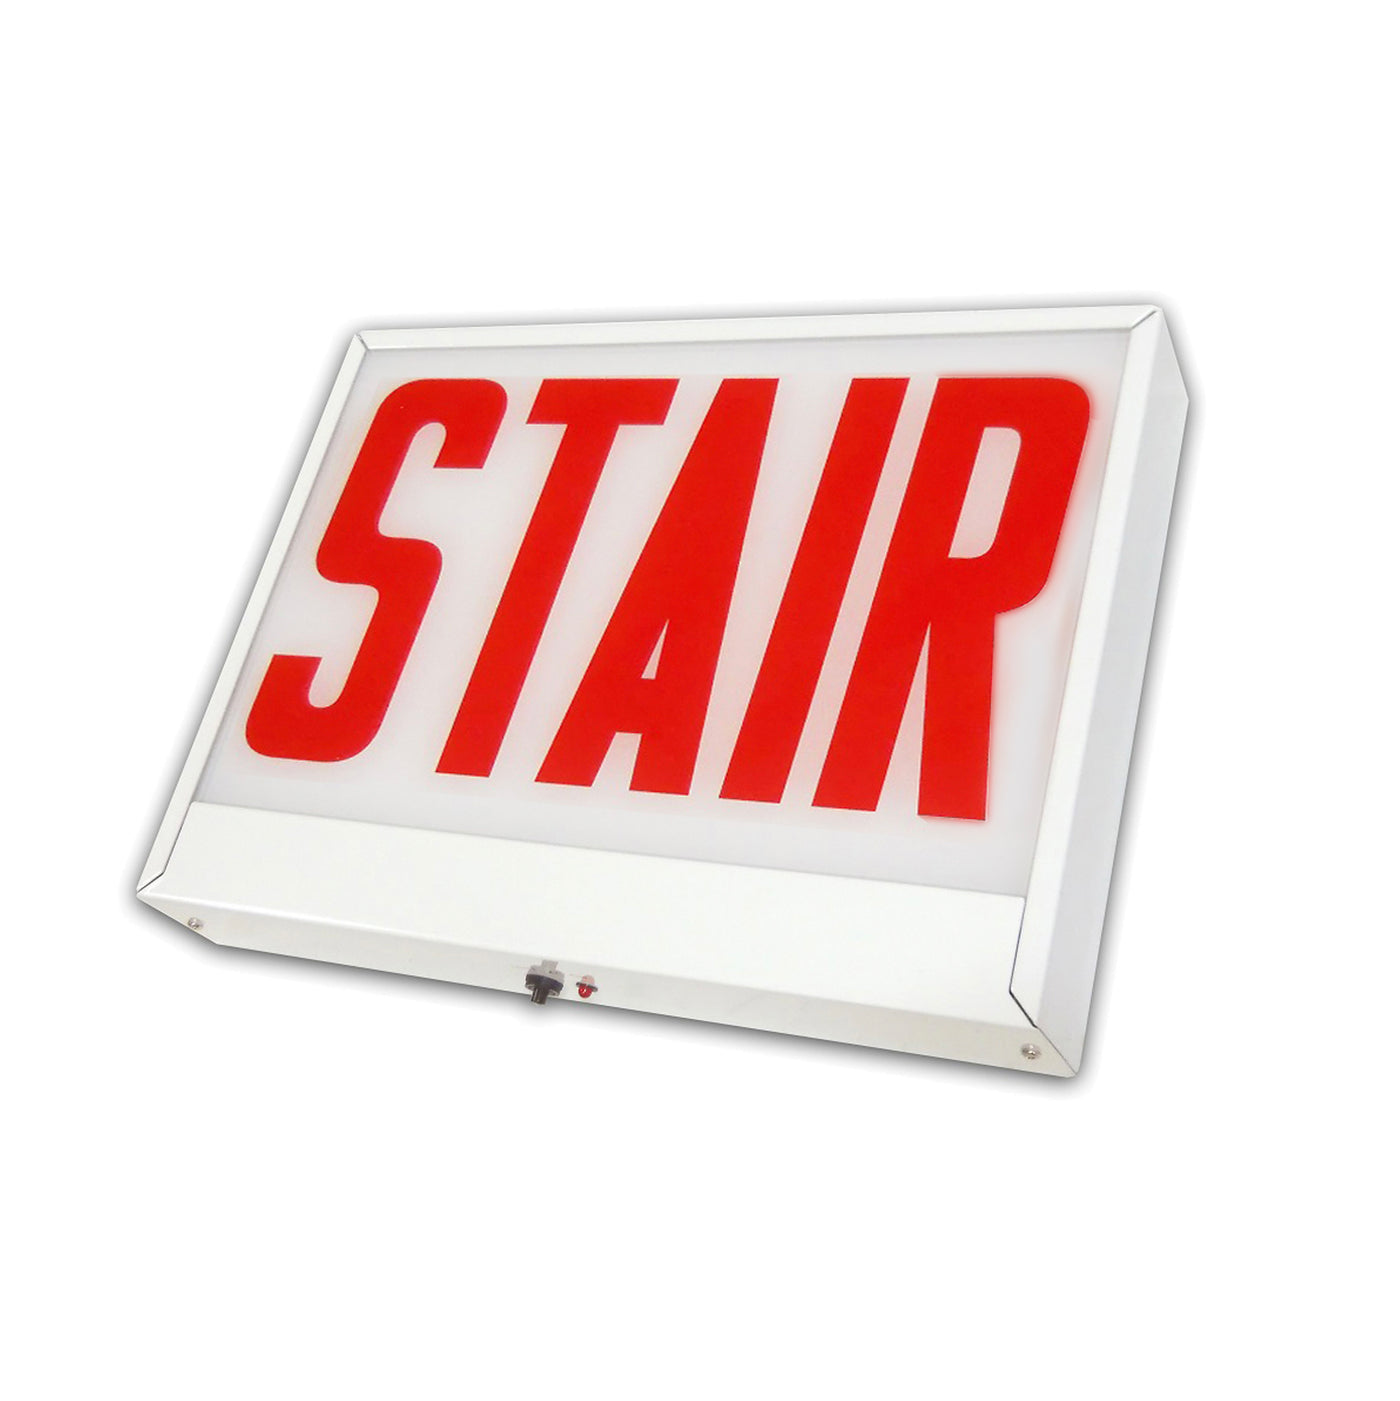 Chicago Approved Steel Exit/Stair Sign, Single/Double Face, Red Letter